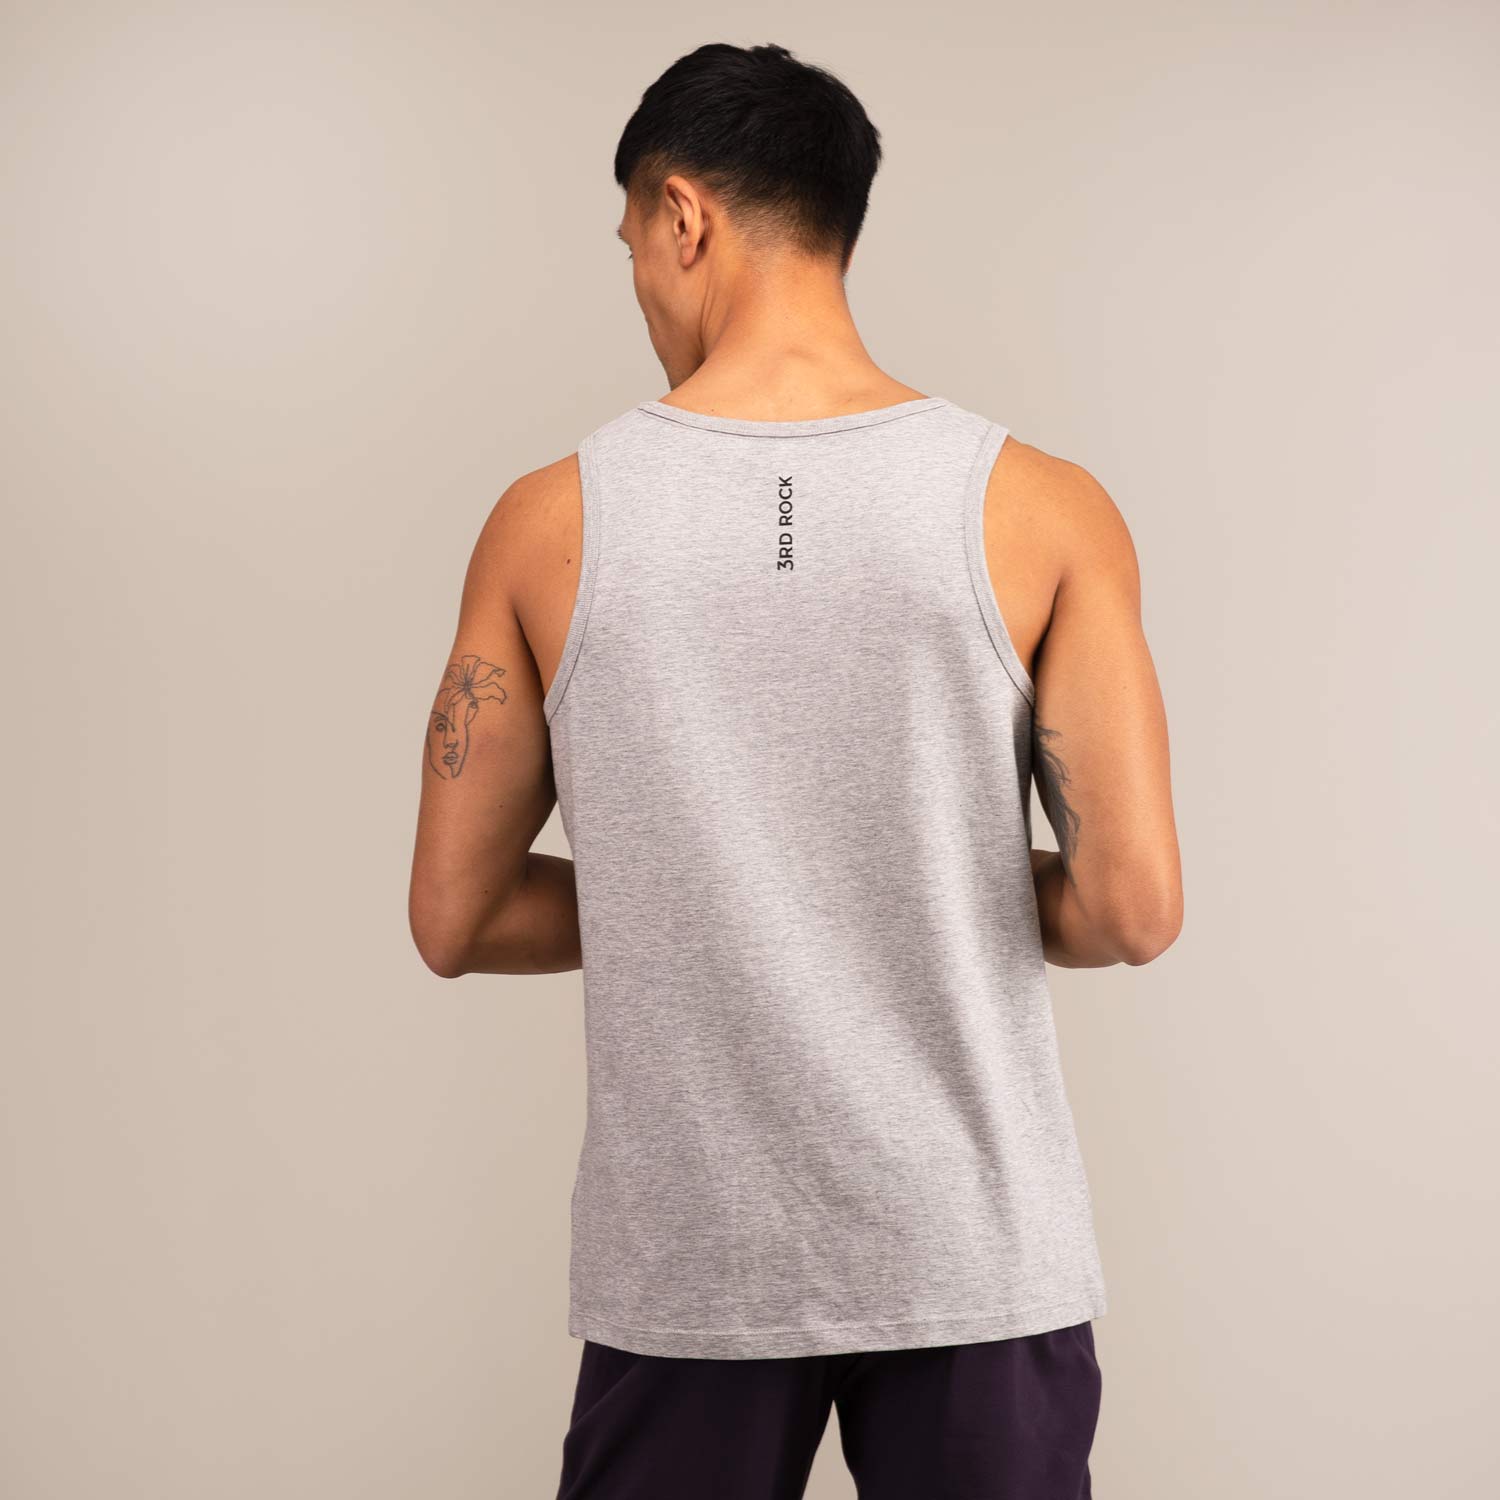 EARTHLOVER VEST | Organic Cotton Comfort Vest | 3RD ROCK Clothing -  Donald is 6ft 1 with a 39" chest and wears a size M M